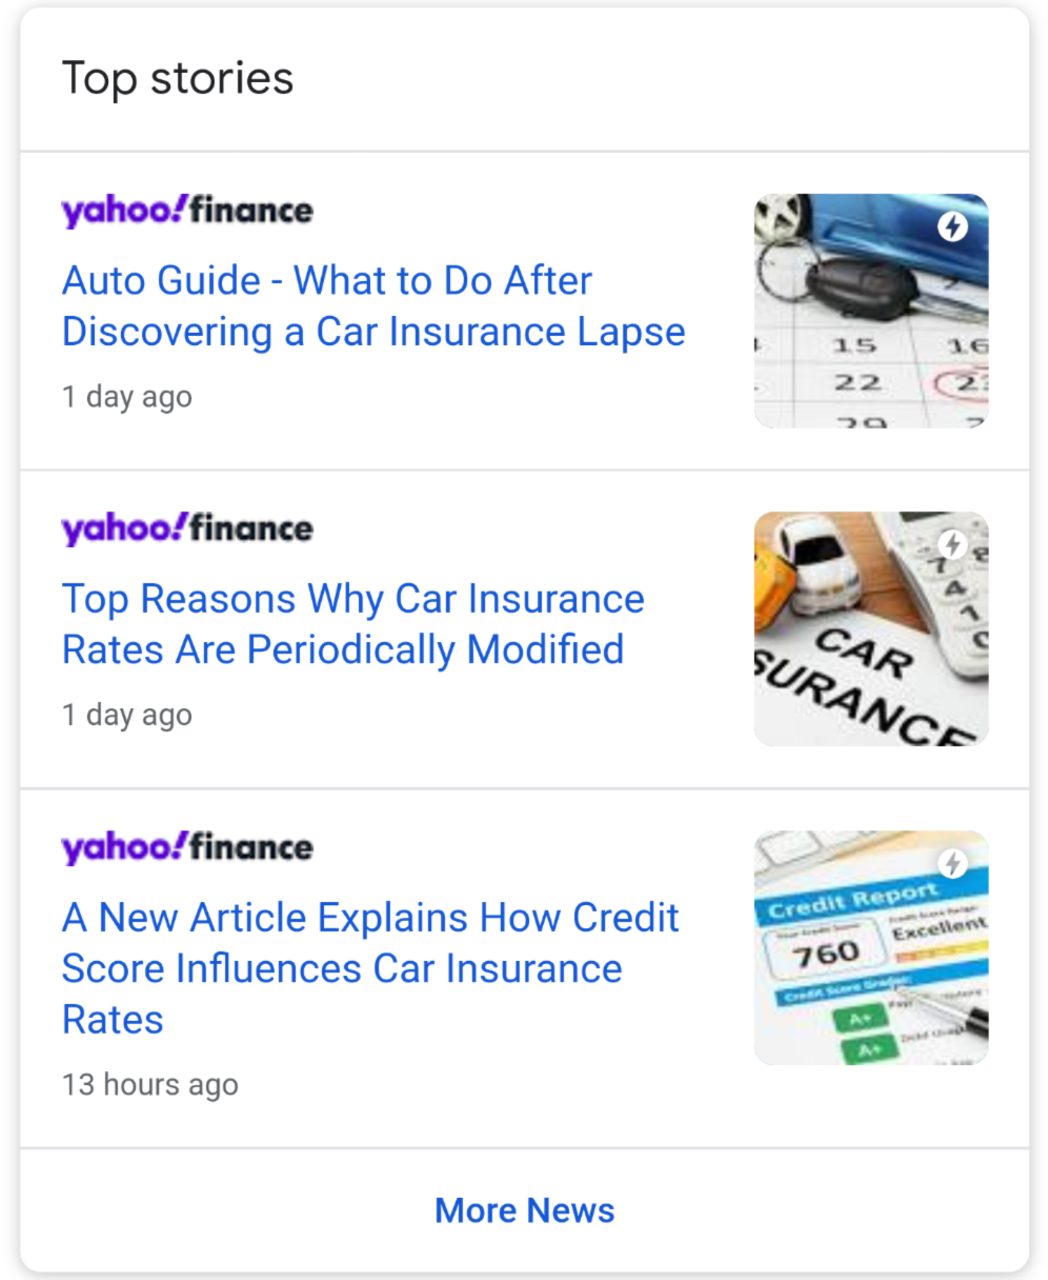 Screengrab showing three press releases published on Yahoo showing up in a Top Stories three pack.